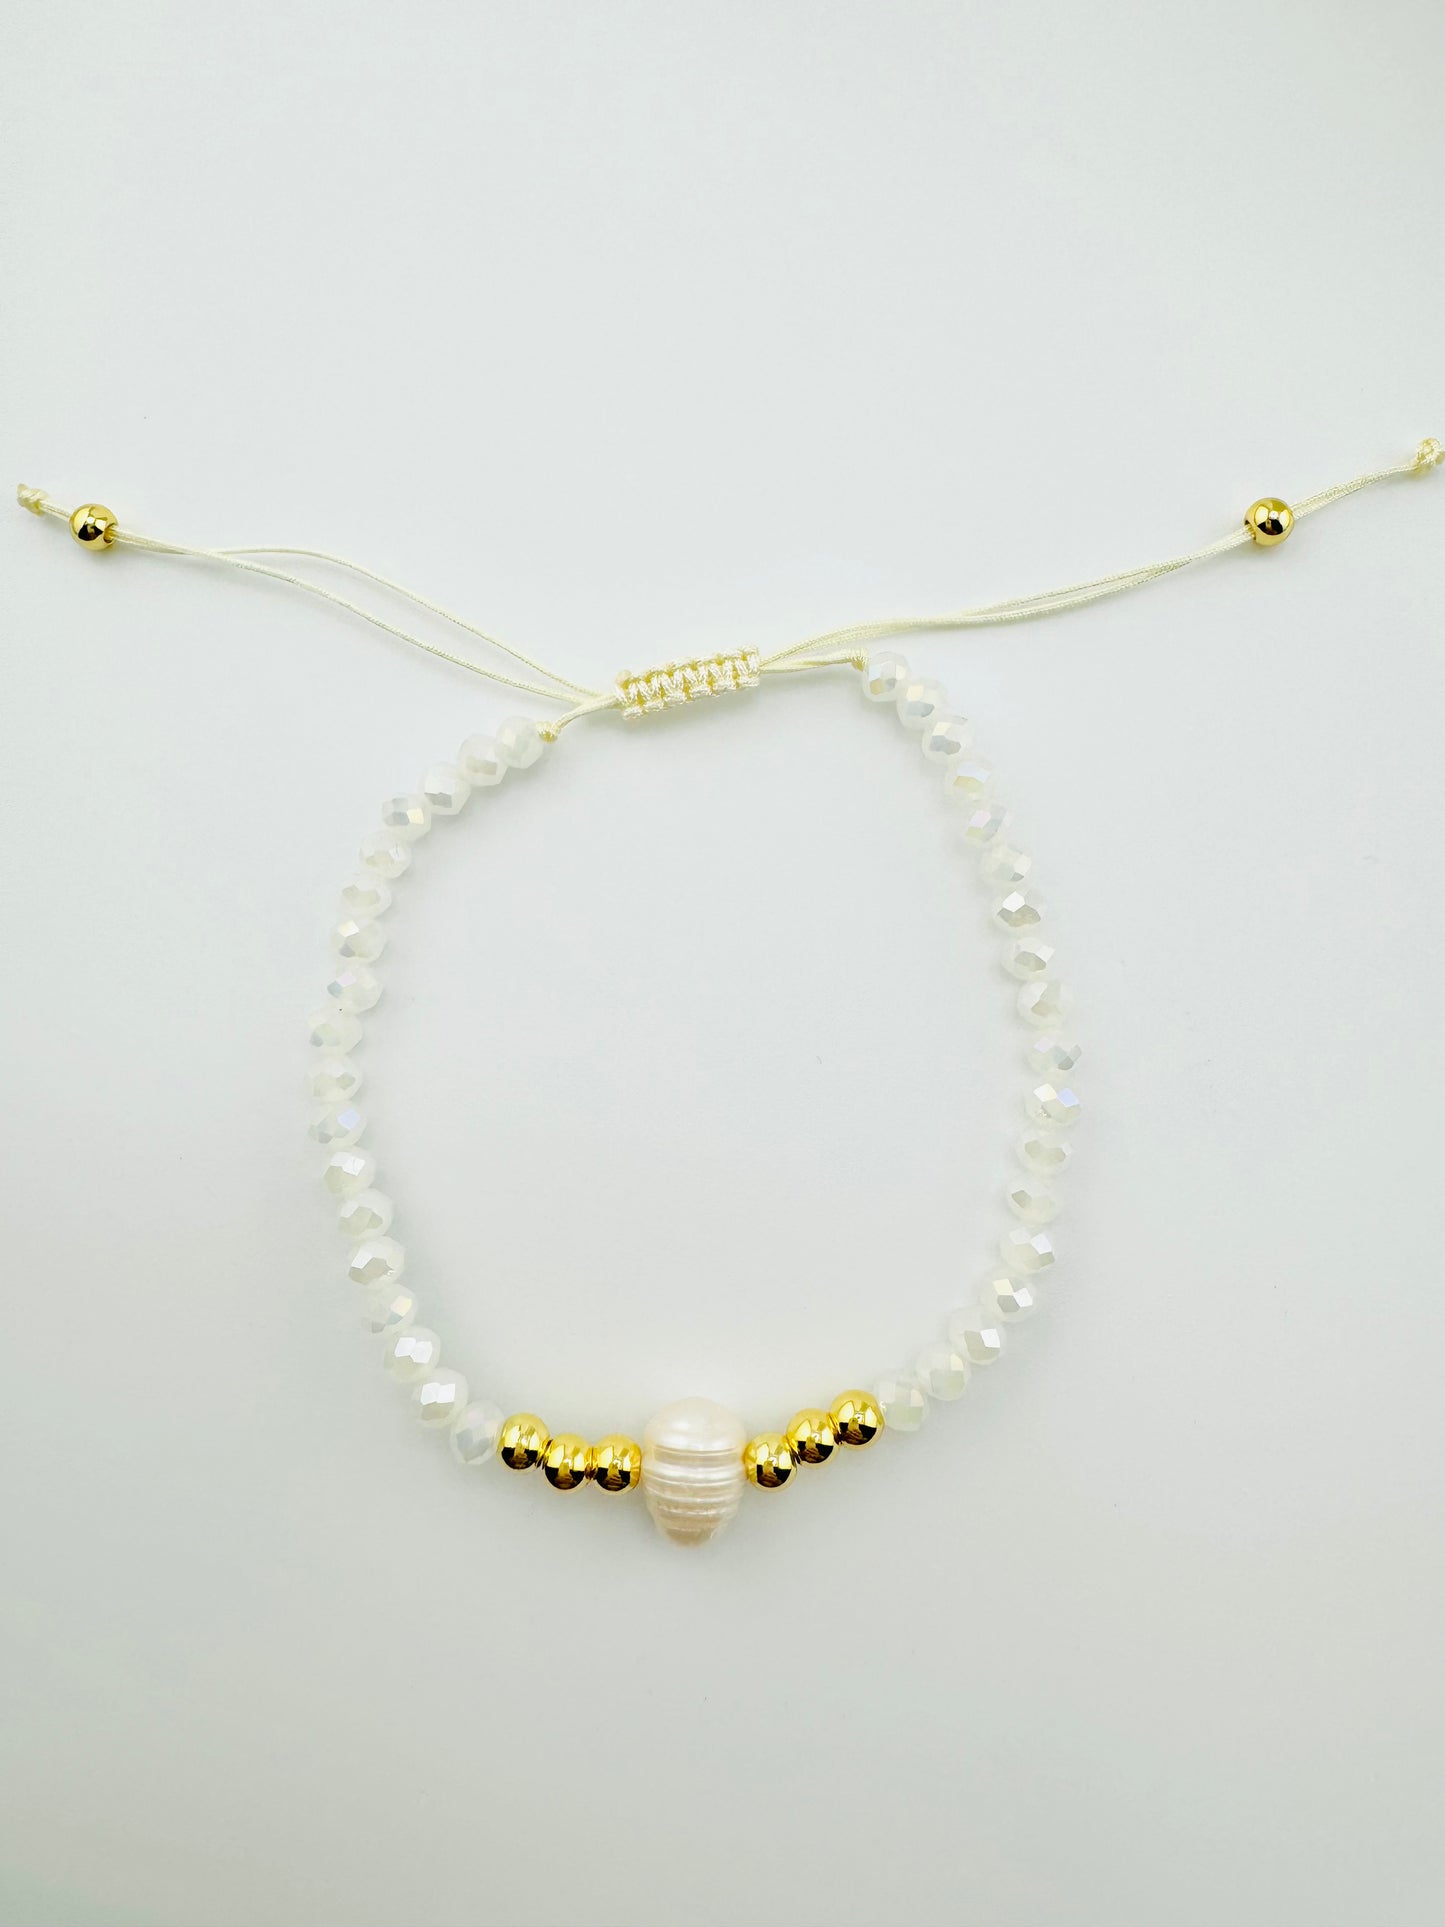 Josie white iridescent beads in 18k gold filled and fresh water pearl bracelet